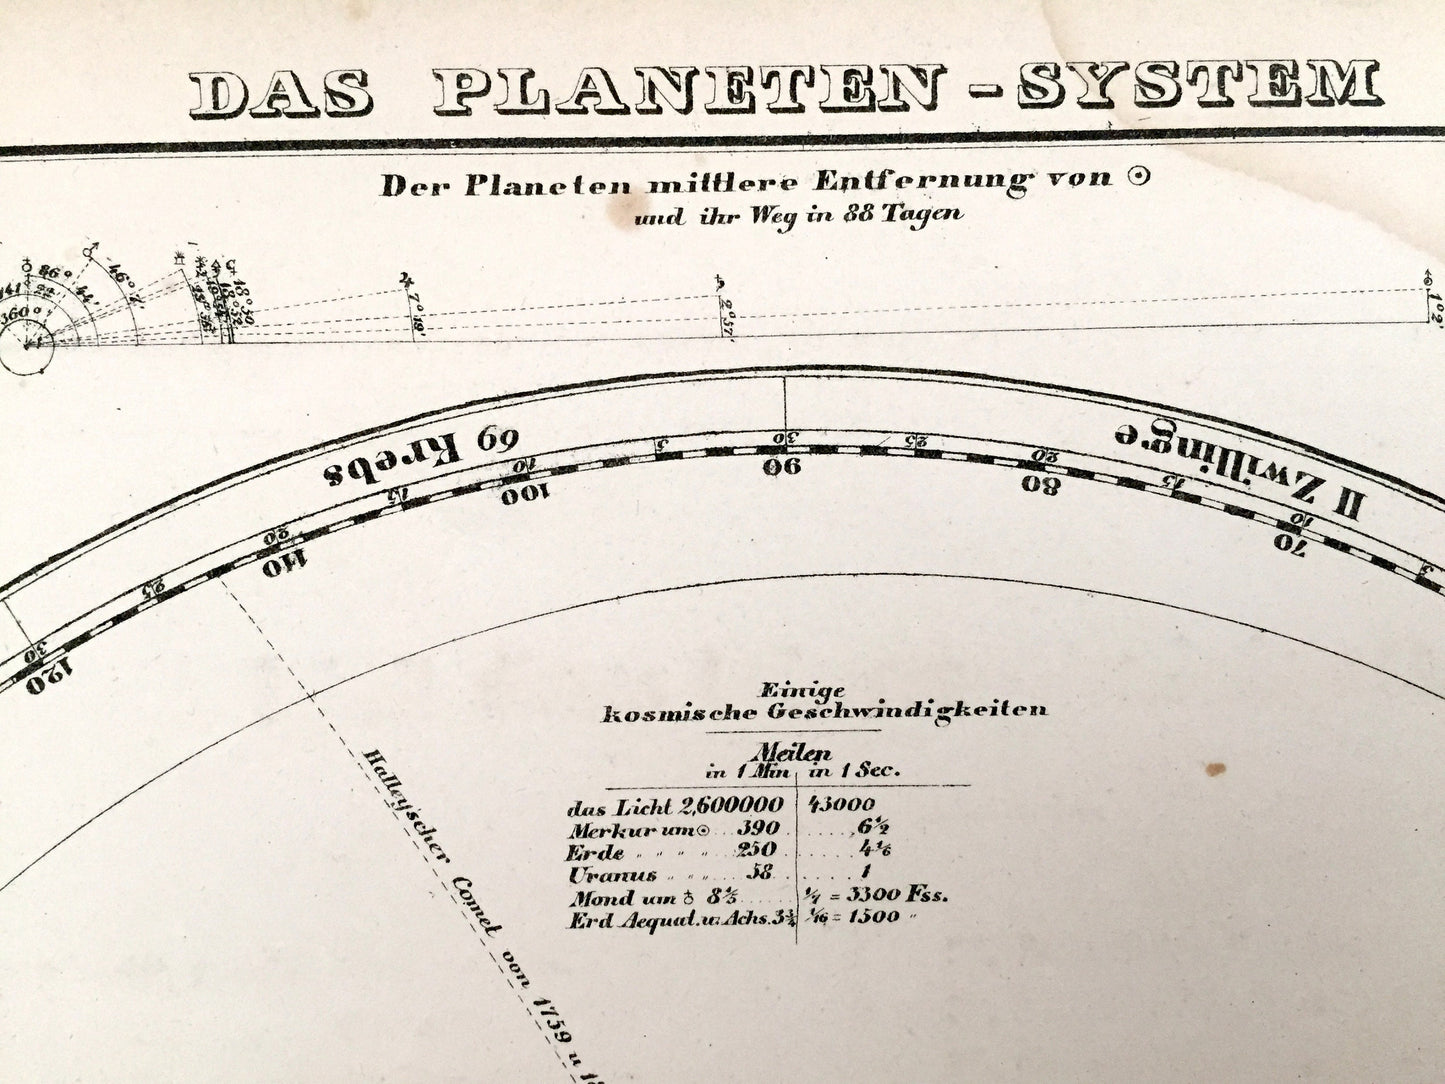 Antique 1855 Planetary System Map from Sohr Berghaus Atlas by Carl Flemming – Das Planeten System, Earth, Mercury, Jupiter, Halley's Comet